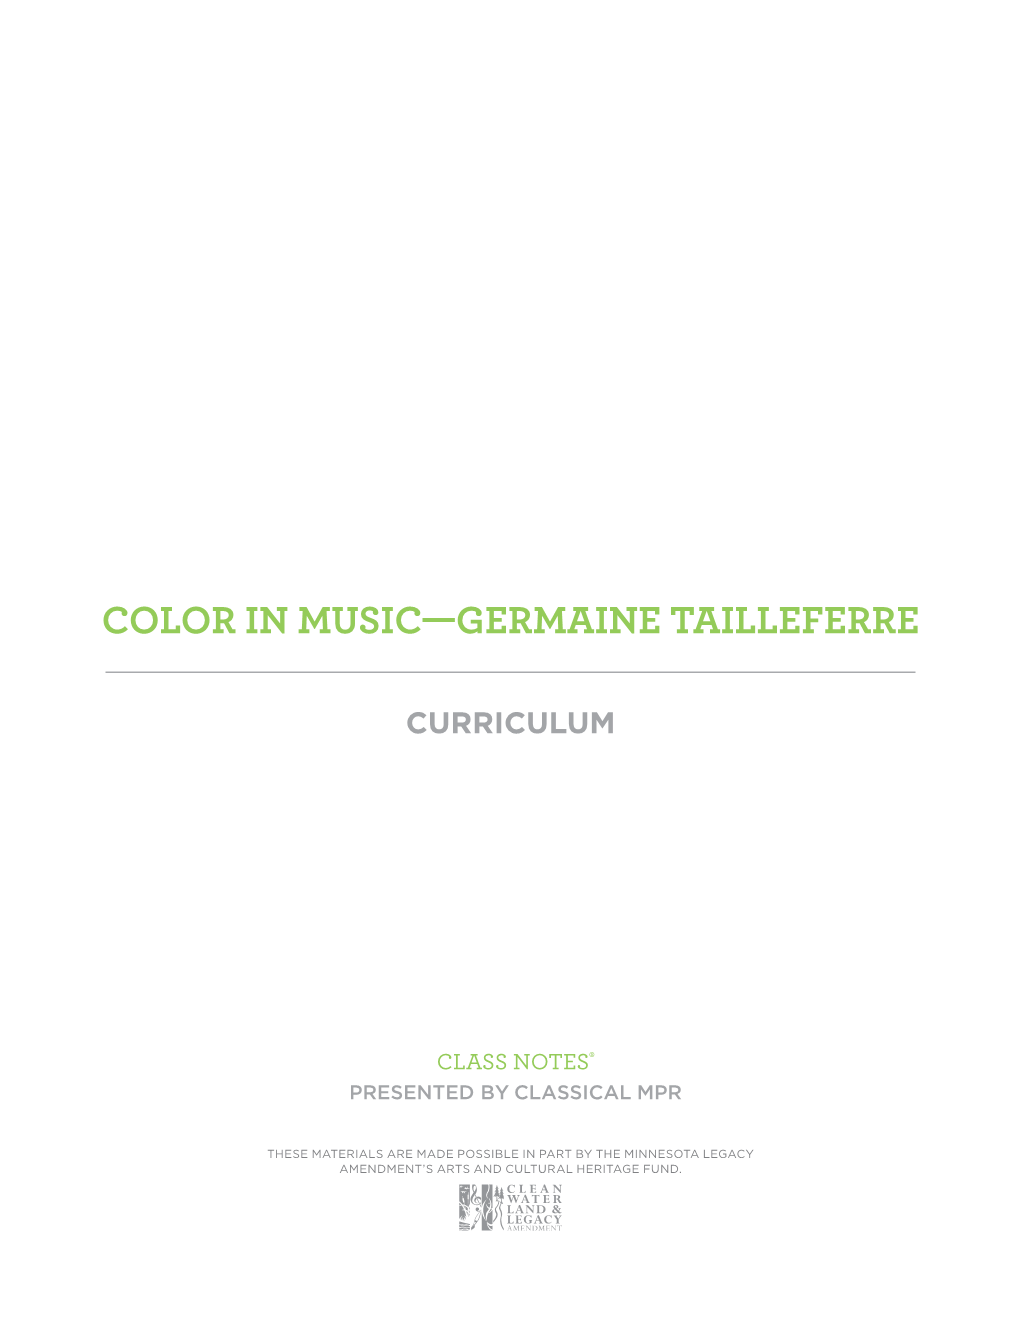 Color in Music—Germaine Tailleferre